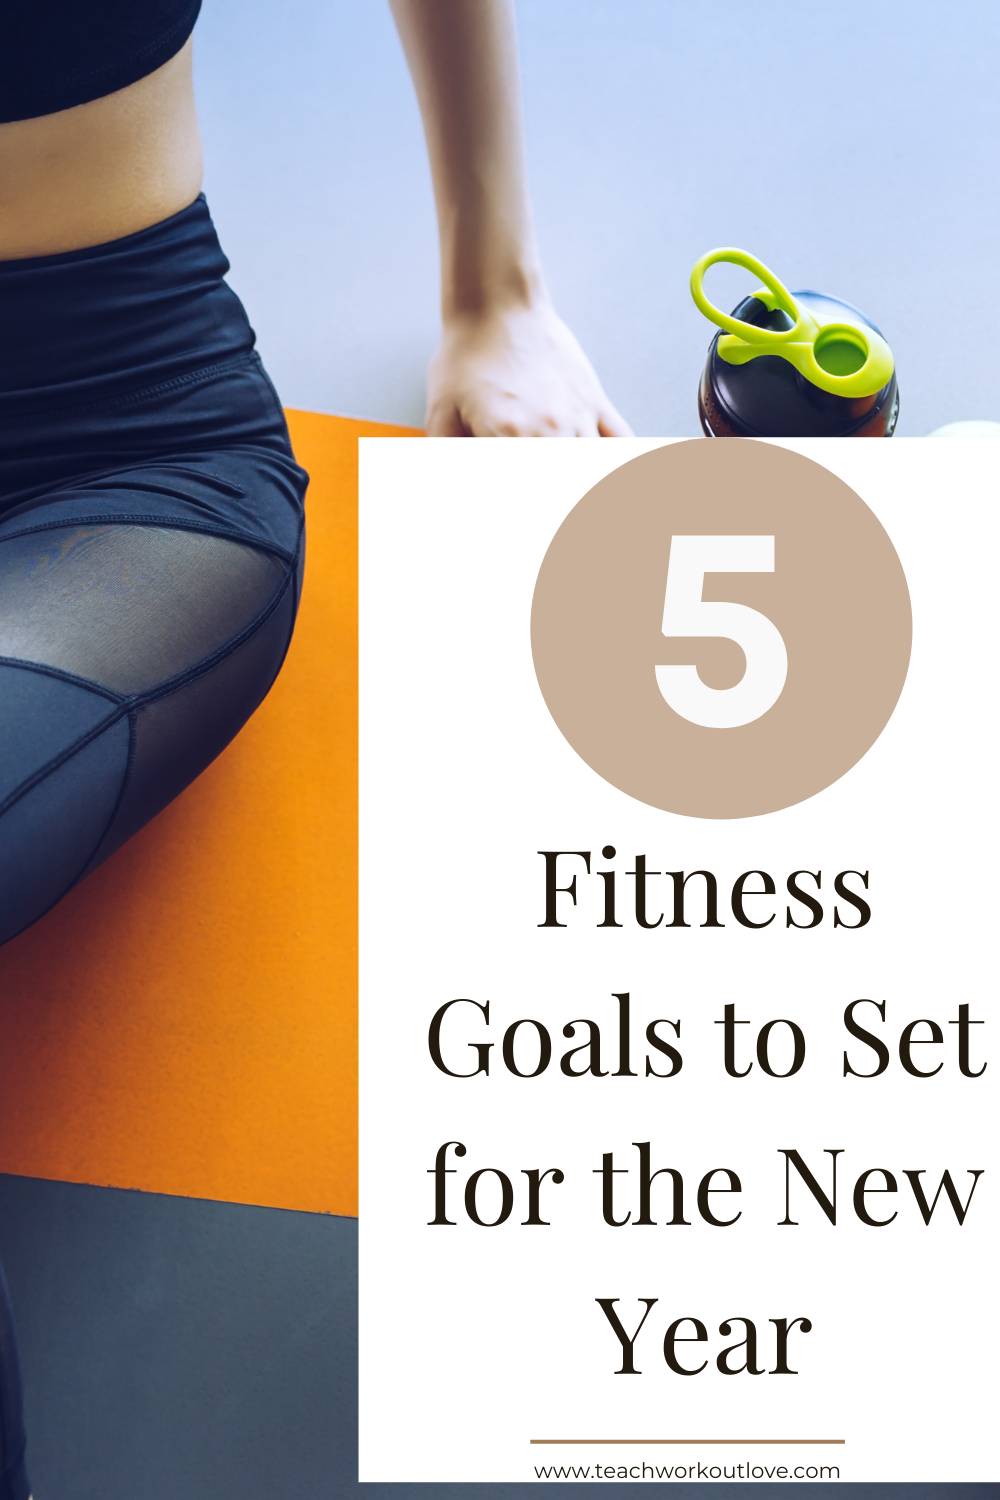 If you are tired of unused gym memberships and fitness goals that are unrealized, here are some ways that moms can set attainable New Year’s fitness goals.